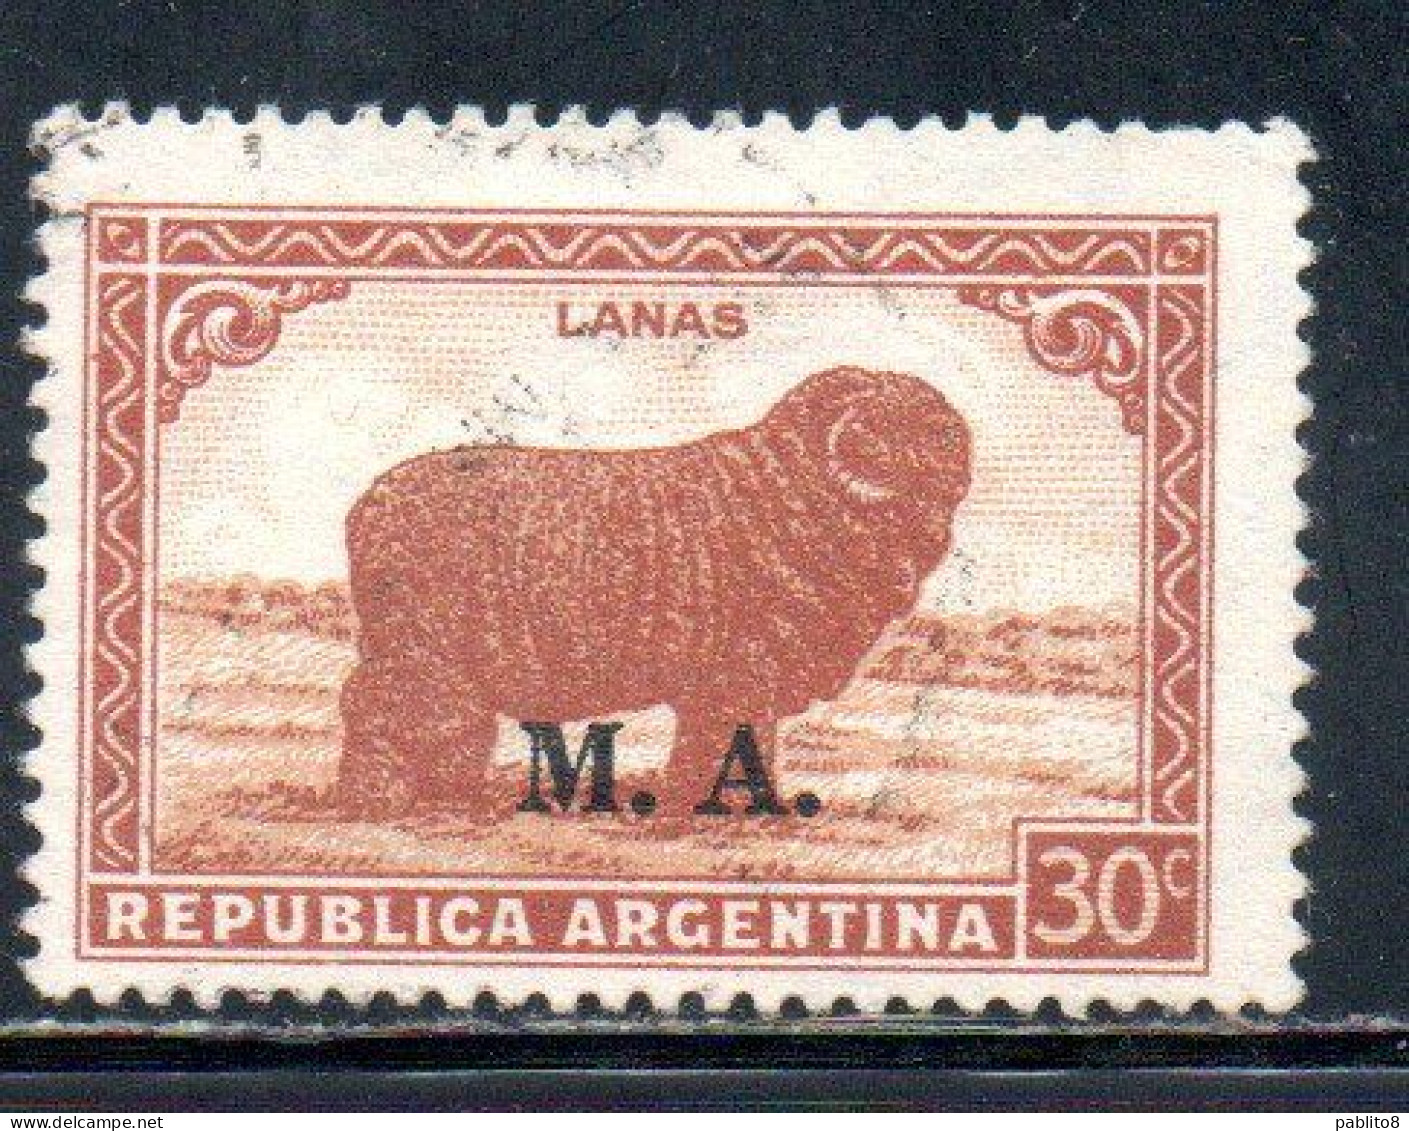 ARGENTINA 1935 1937 OFFICIAL DEPARTMENT STAMP OVERPRINTED M.A. MINISTRY OF AGRICULTURE MA 30c USED USADO - Service